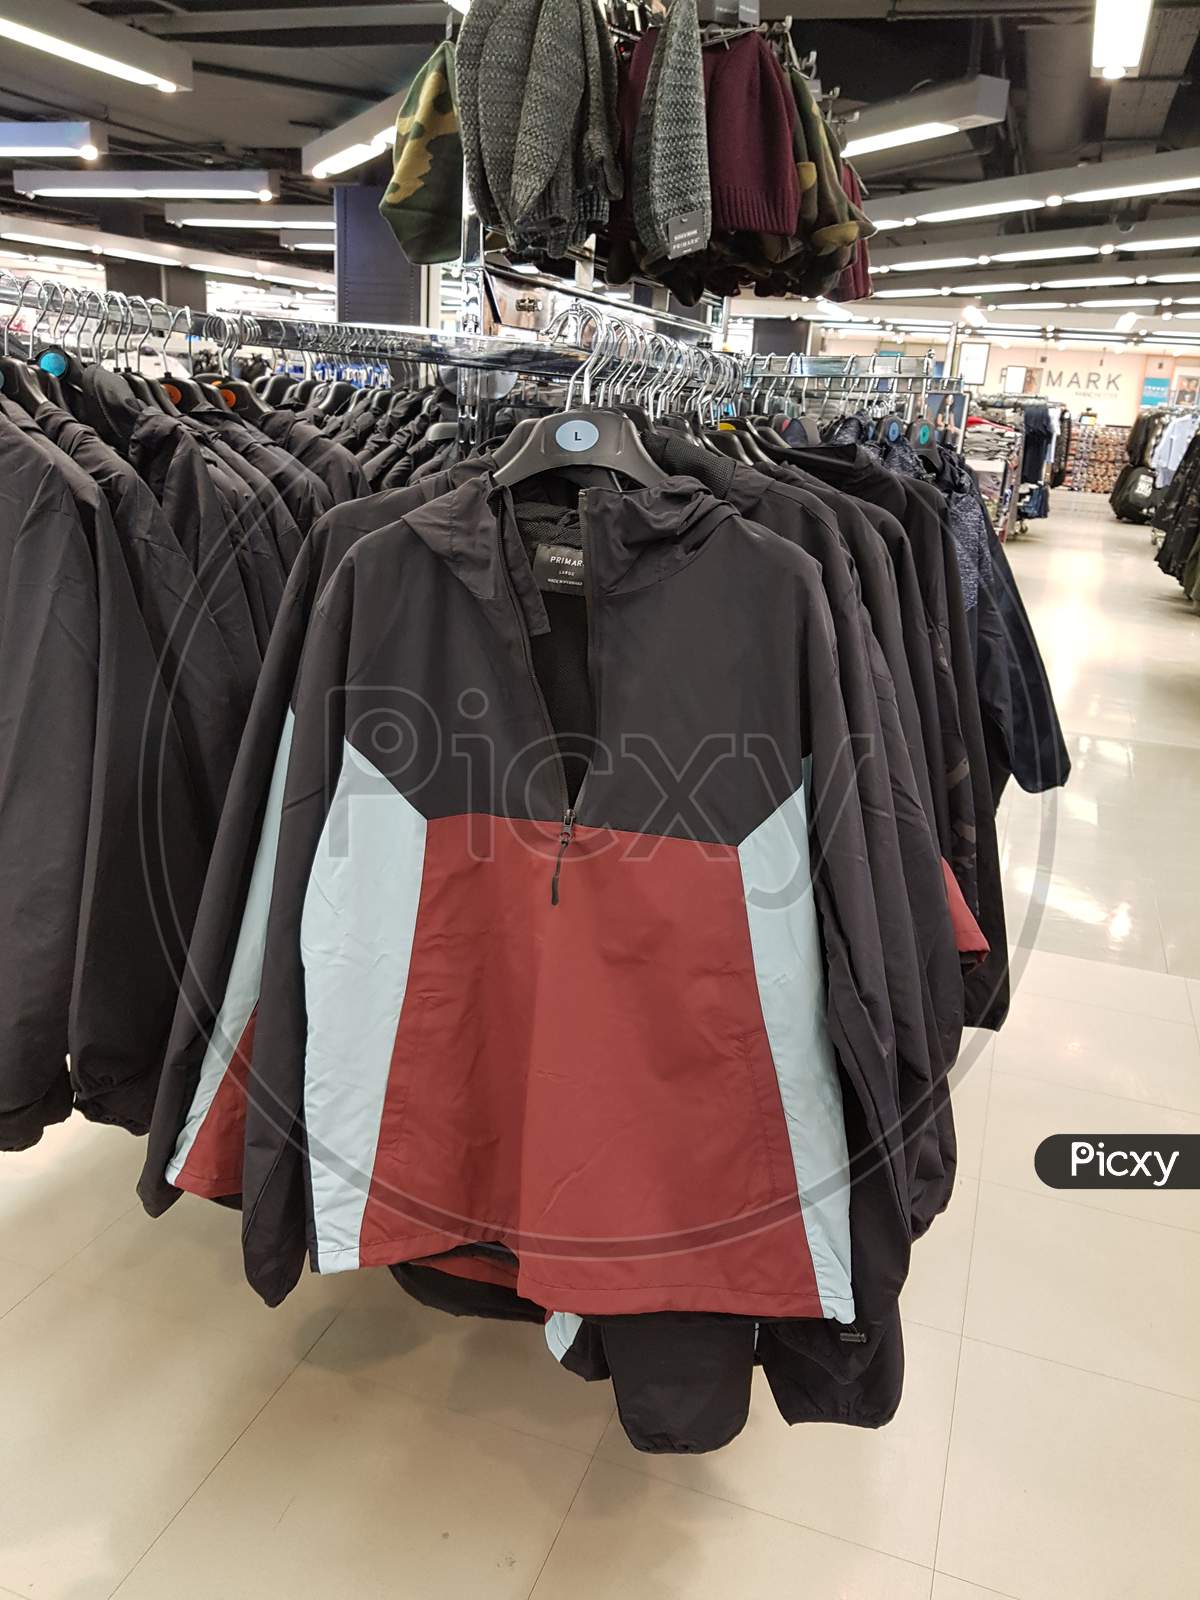 Clothing Section in a Shopping Mall